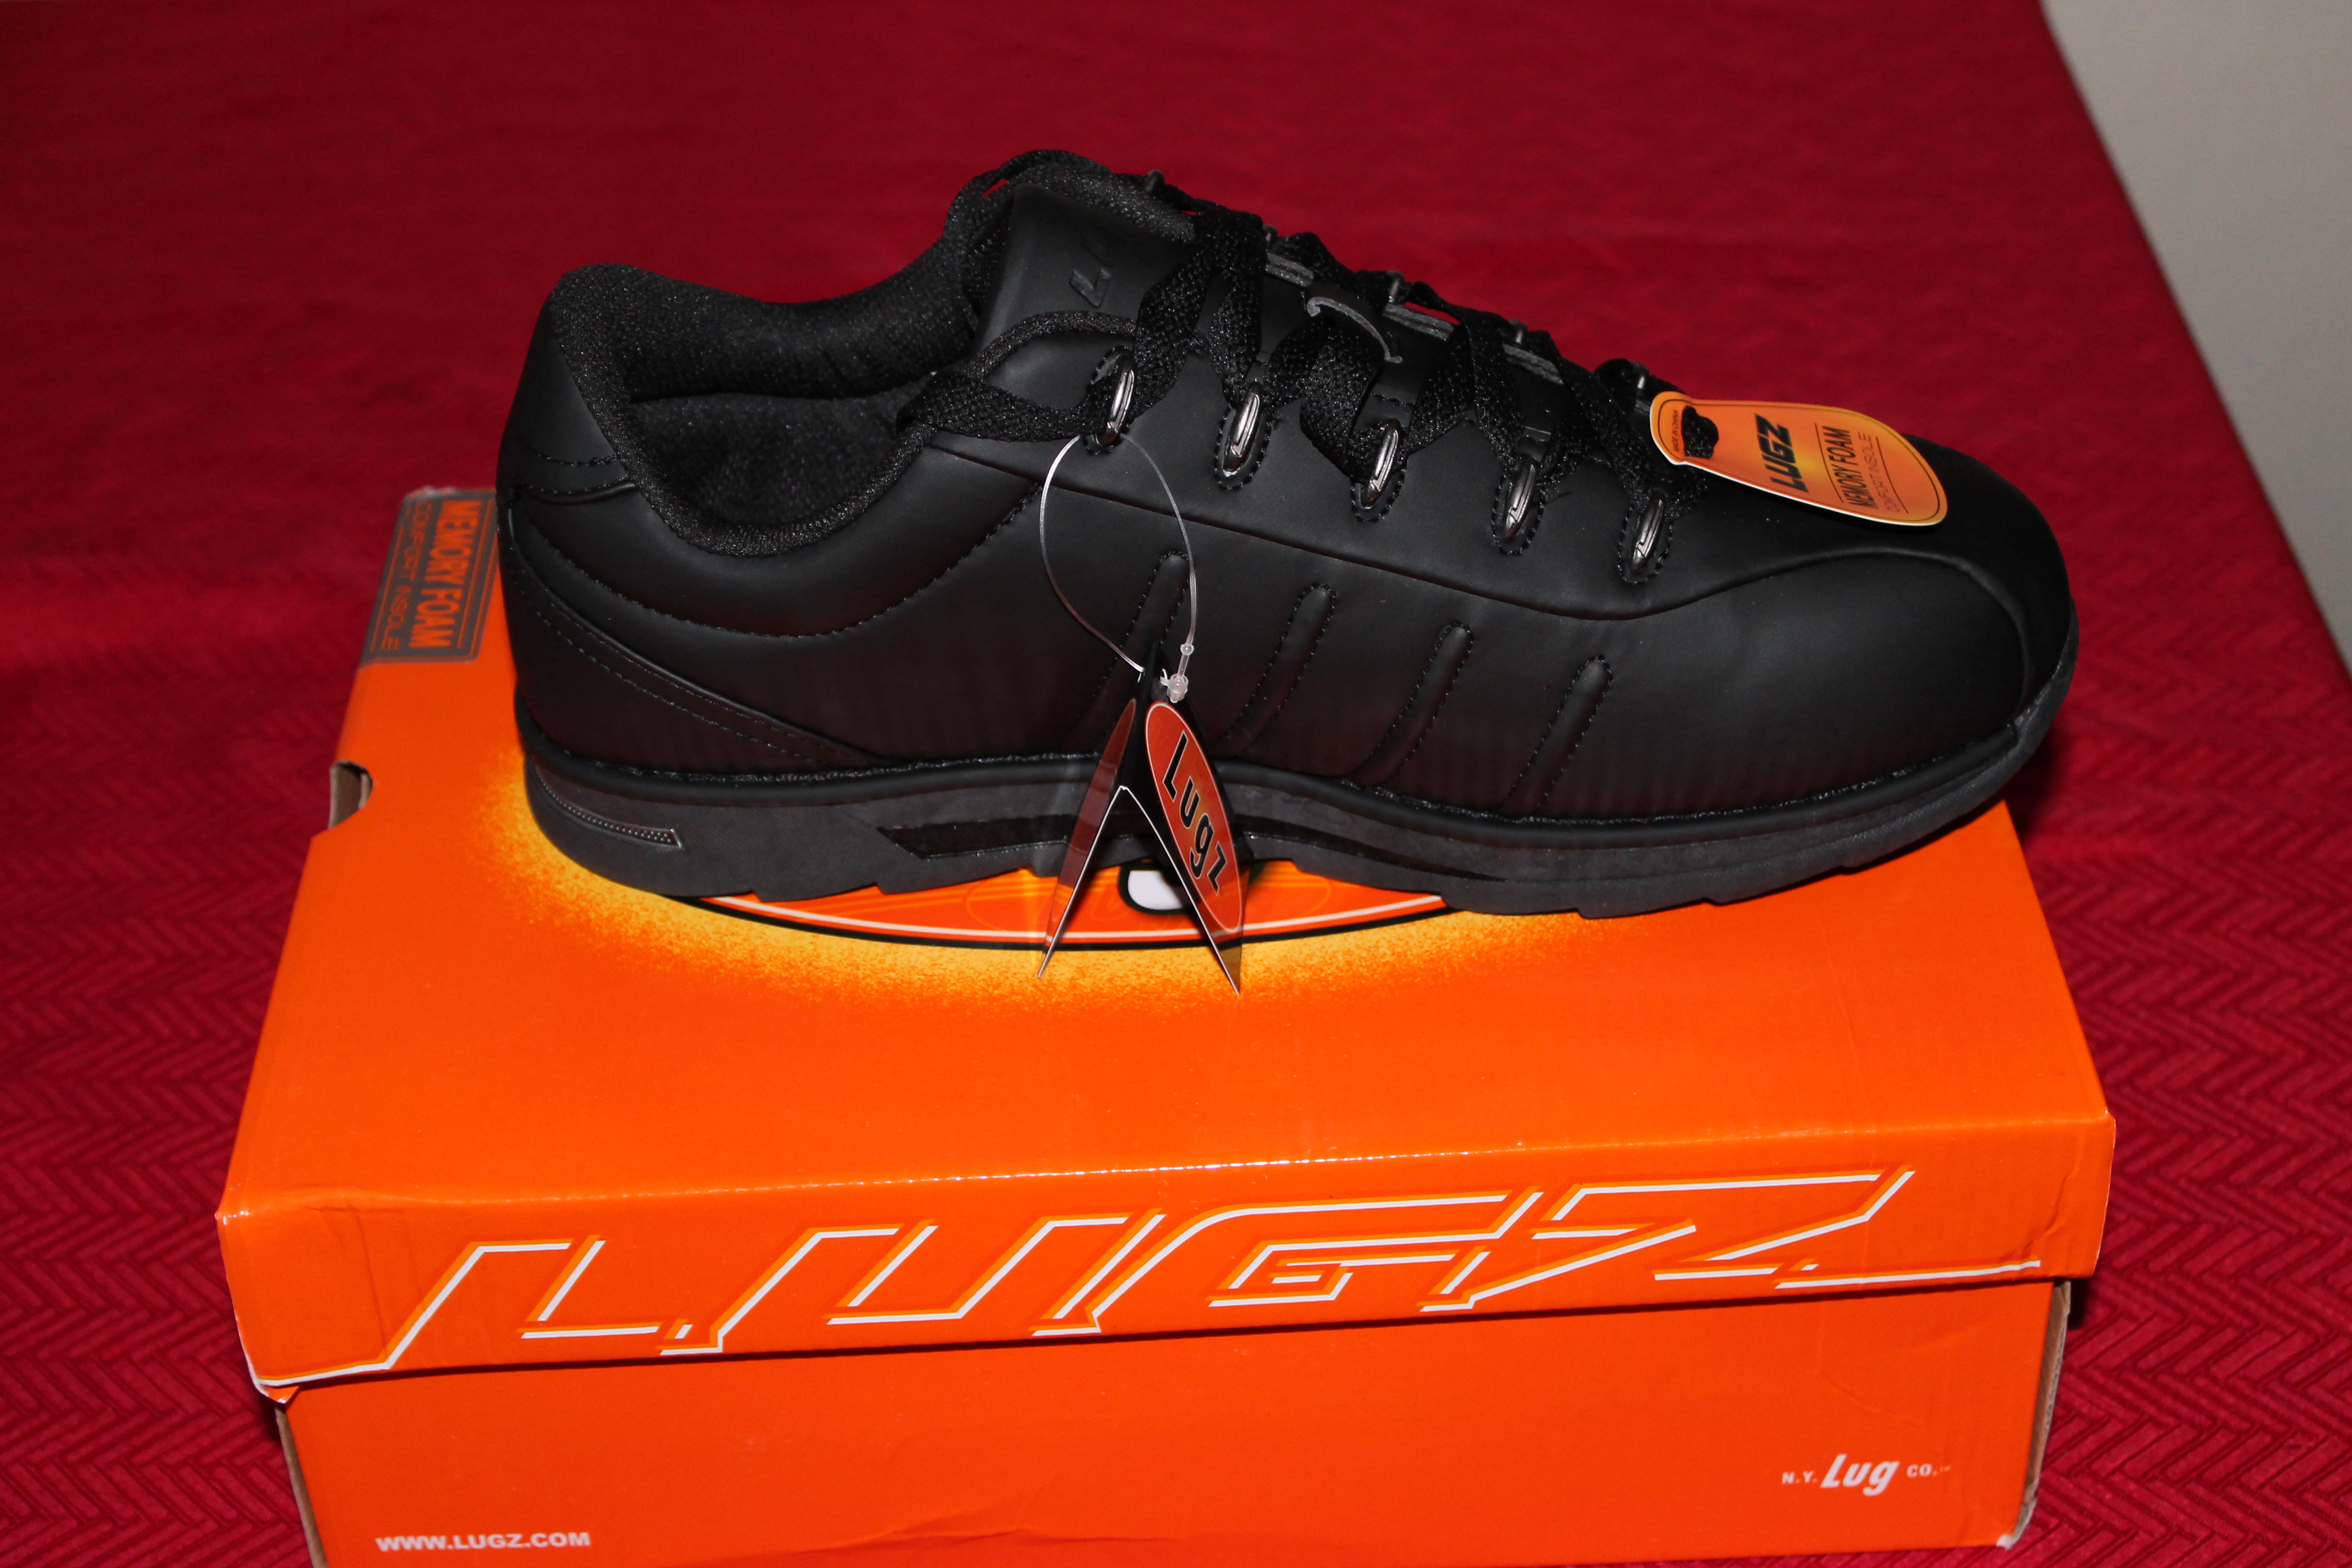 Lugz Black Changeovers, made just for 